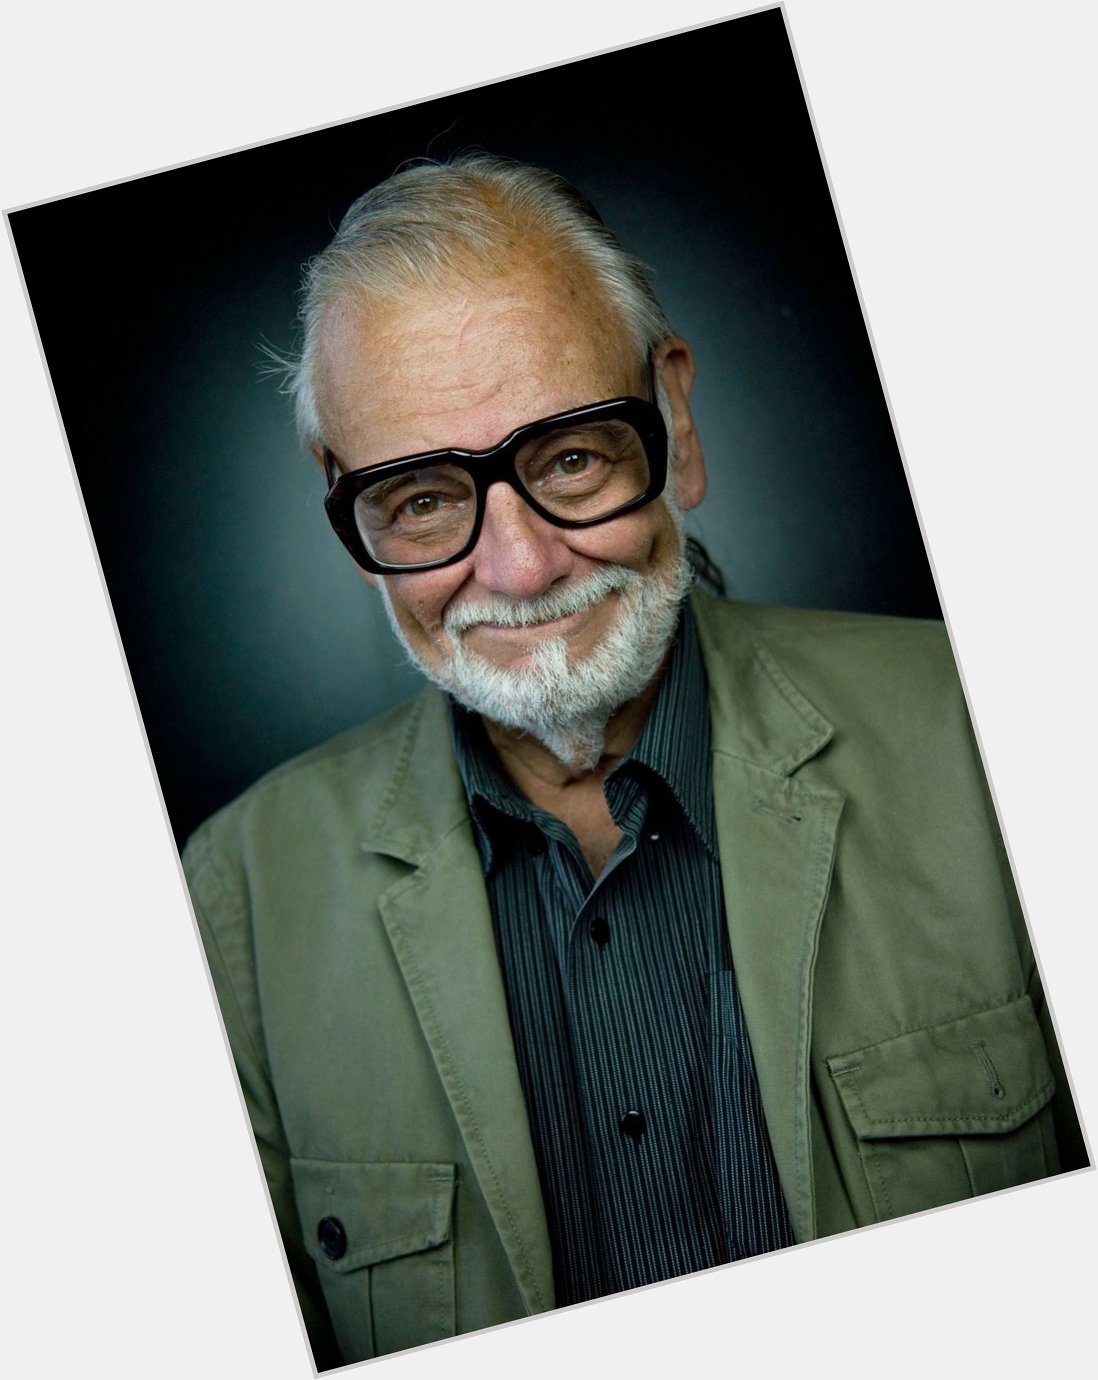 A happy birthday to the great George A Romero. He would have been 79 today. Sleep well in R lyeh, good friend! 